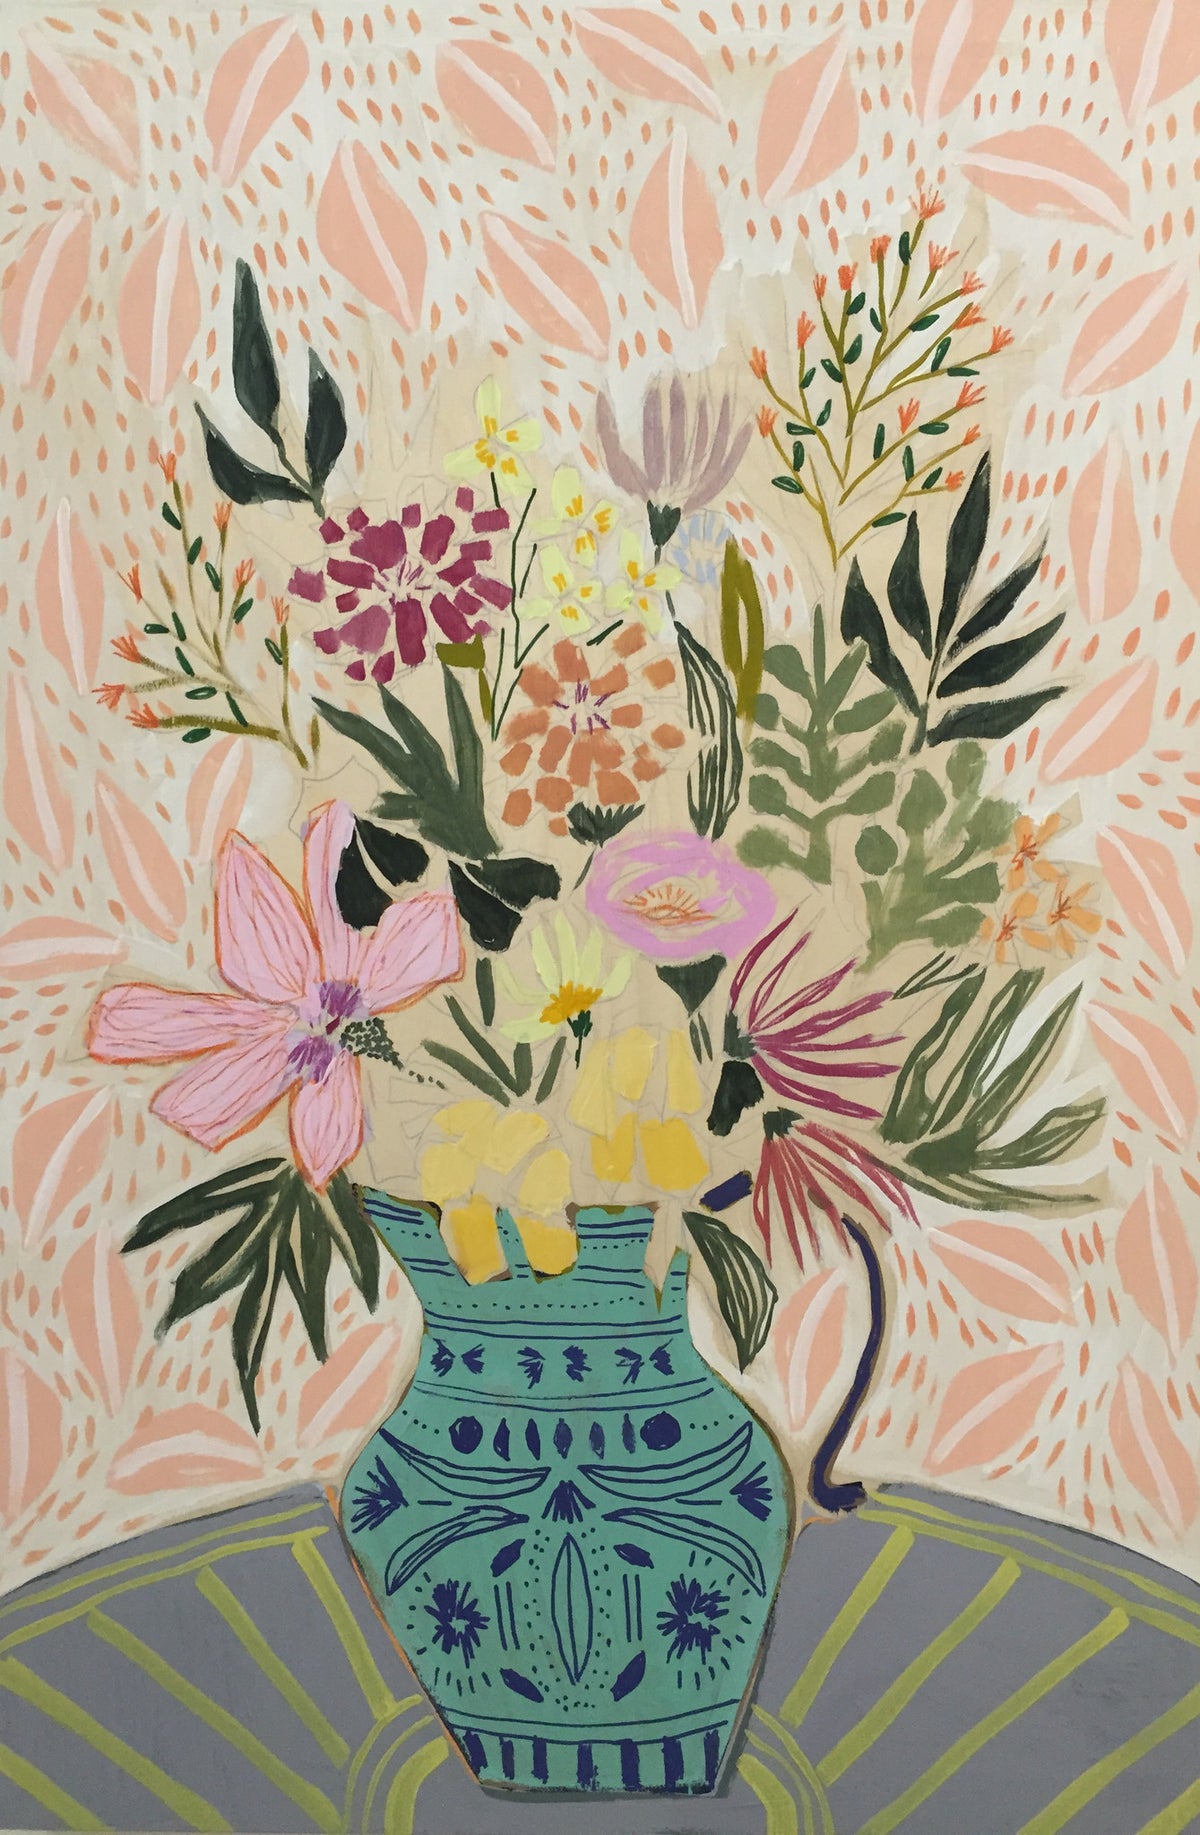 FLOWERS FOR RUTHIE - 24X36